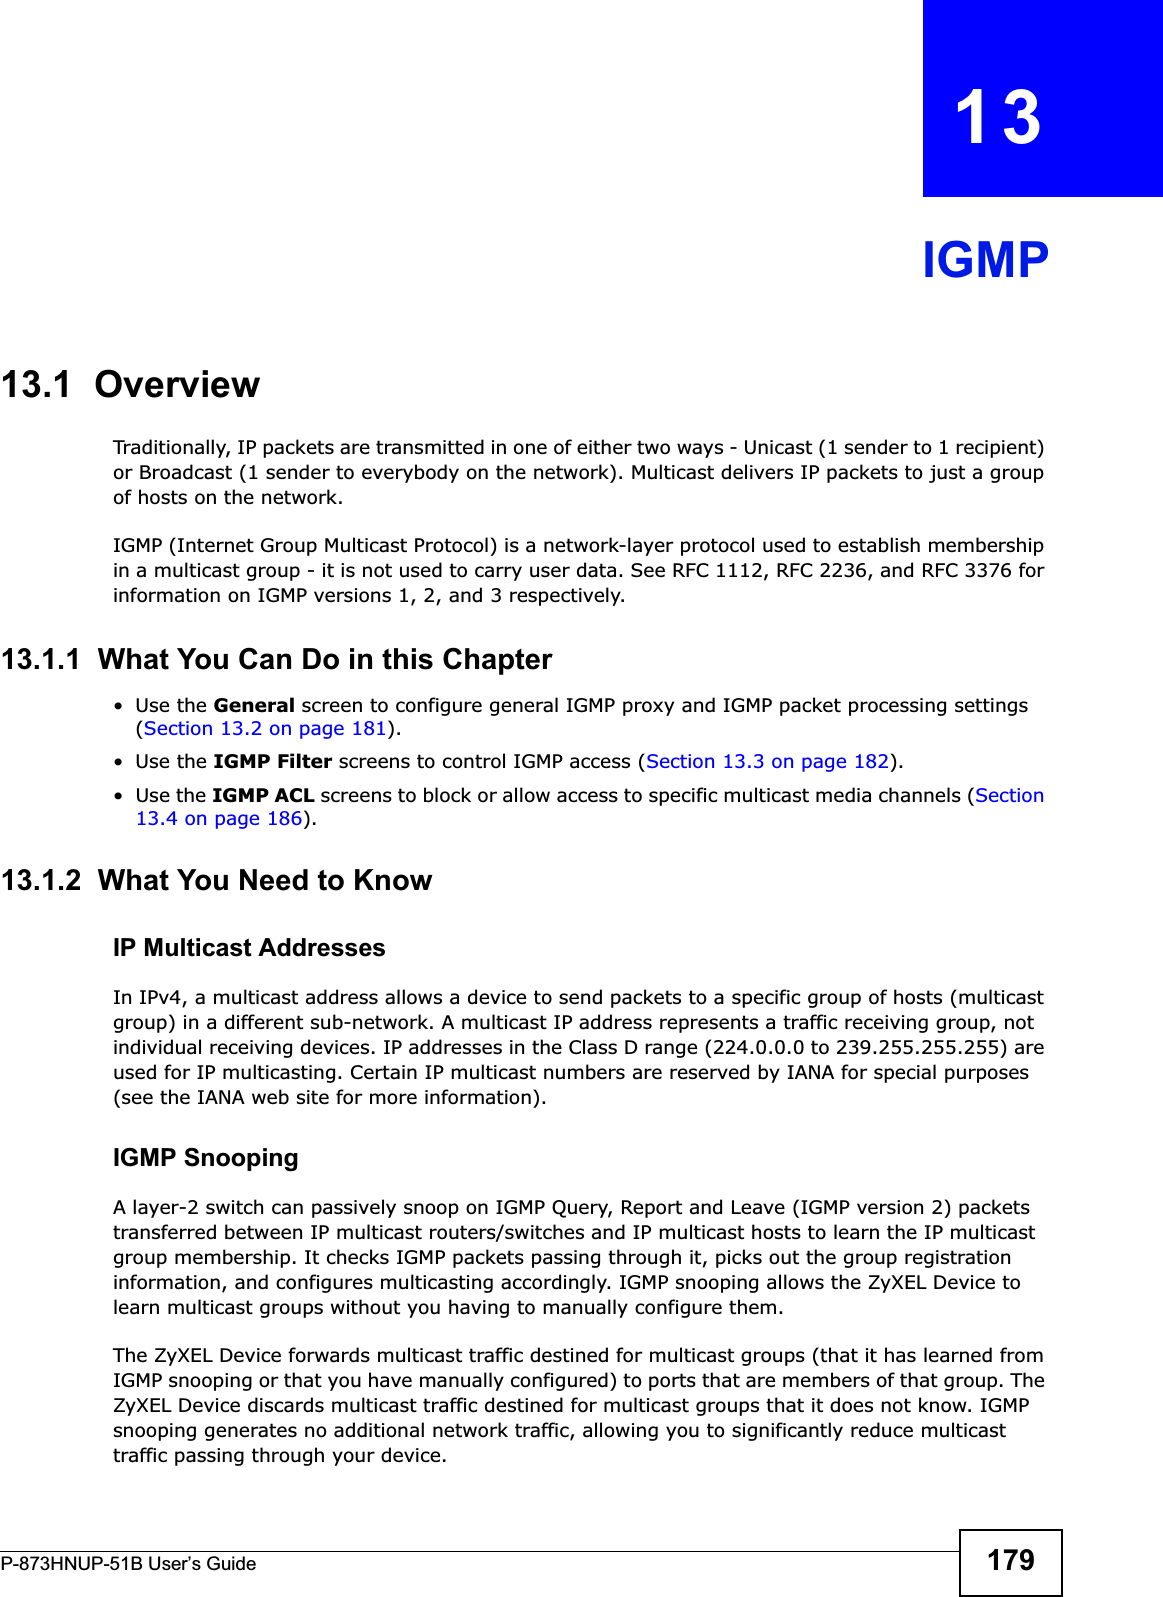 P-873HNUP-51B User’s Guide 179CHAPTER   13IGMP13.1  OverviewTraditionally, IP packets are transmitted in one of either two ways - Unicast (1 sender to 1 recipient) or Broadcast (1 sender to everybody on the network). Multicast delivers IP packets to just a group of hosts on the network.IGMP (Internet Group Multicast Protocol) is a network-layer protocol used to establish membership in a multicast group - it is not used to carry user data. See RFC 1112, RFC 2236, and RFC 3376 for information on IGMP versions 1, 2, and 3 respectively.13.1.1  What You Can Do in this Chapter•Use the General screen to configure general IGMP proxy and IGMP packet processing settings (Section 13.2 on page 181).•Use the IGMP Filter screens to control IGMP access (Section 13.3 on page 182).•Use the IGMP ACL screens to block or allow access to specific multicast media channels (Section 13.4 on page 186).13.1.2  What You Need to KnowIP Multicast AddressesIn IPv4, a multicast address allows a device to send packets to a specific group of hosts (multicast group) in a different sub-network. A multicast IP address represents a traffic receiving group, not individual receiving devices. IP addresses in the Class D range (224.0.0.0 to 239.255.255.255) are used for IP multicasting. Certain IP multicast numbers are reserved by IANA for special purposes (see the IANA web site for more information).IGMP SnoopingA layer-2 switch can passively snoop on IGMP Query, Report and Leave (IGMP version 2) packets transferred between IP multicast routers/switches and IP multicast hosts to learn the IP multicast group membership. It checks IGMP packets passing through it, picks out the group registration information, and configures multicasting accordingly. IGMP snooping allows the ZyXEL Device to learn multicast groups without you having to manually configure them.The ZyXEL Device forwards multicast traffic destined for multicast groups (that it has learned from IGMP snooping or that you have manually configured) to ports that are members of that group. The ZyXEL Device discards multicast traffic destined for multicast groups that it does not know. IGMP snooping generates no additional network traffic, allowing you to significantly reduce multicast traffic passing through your device.